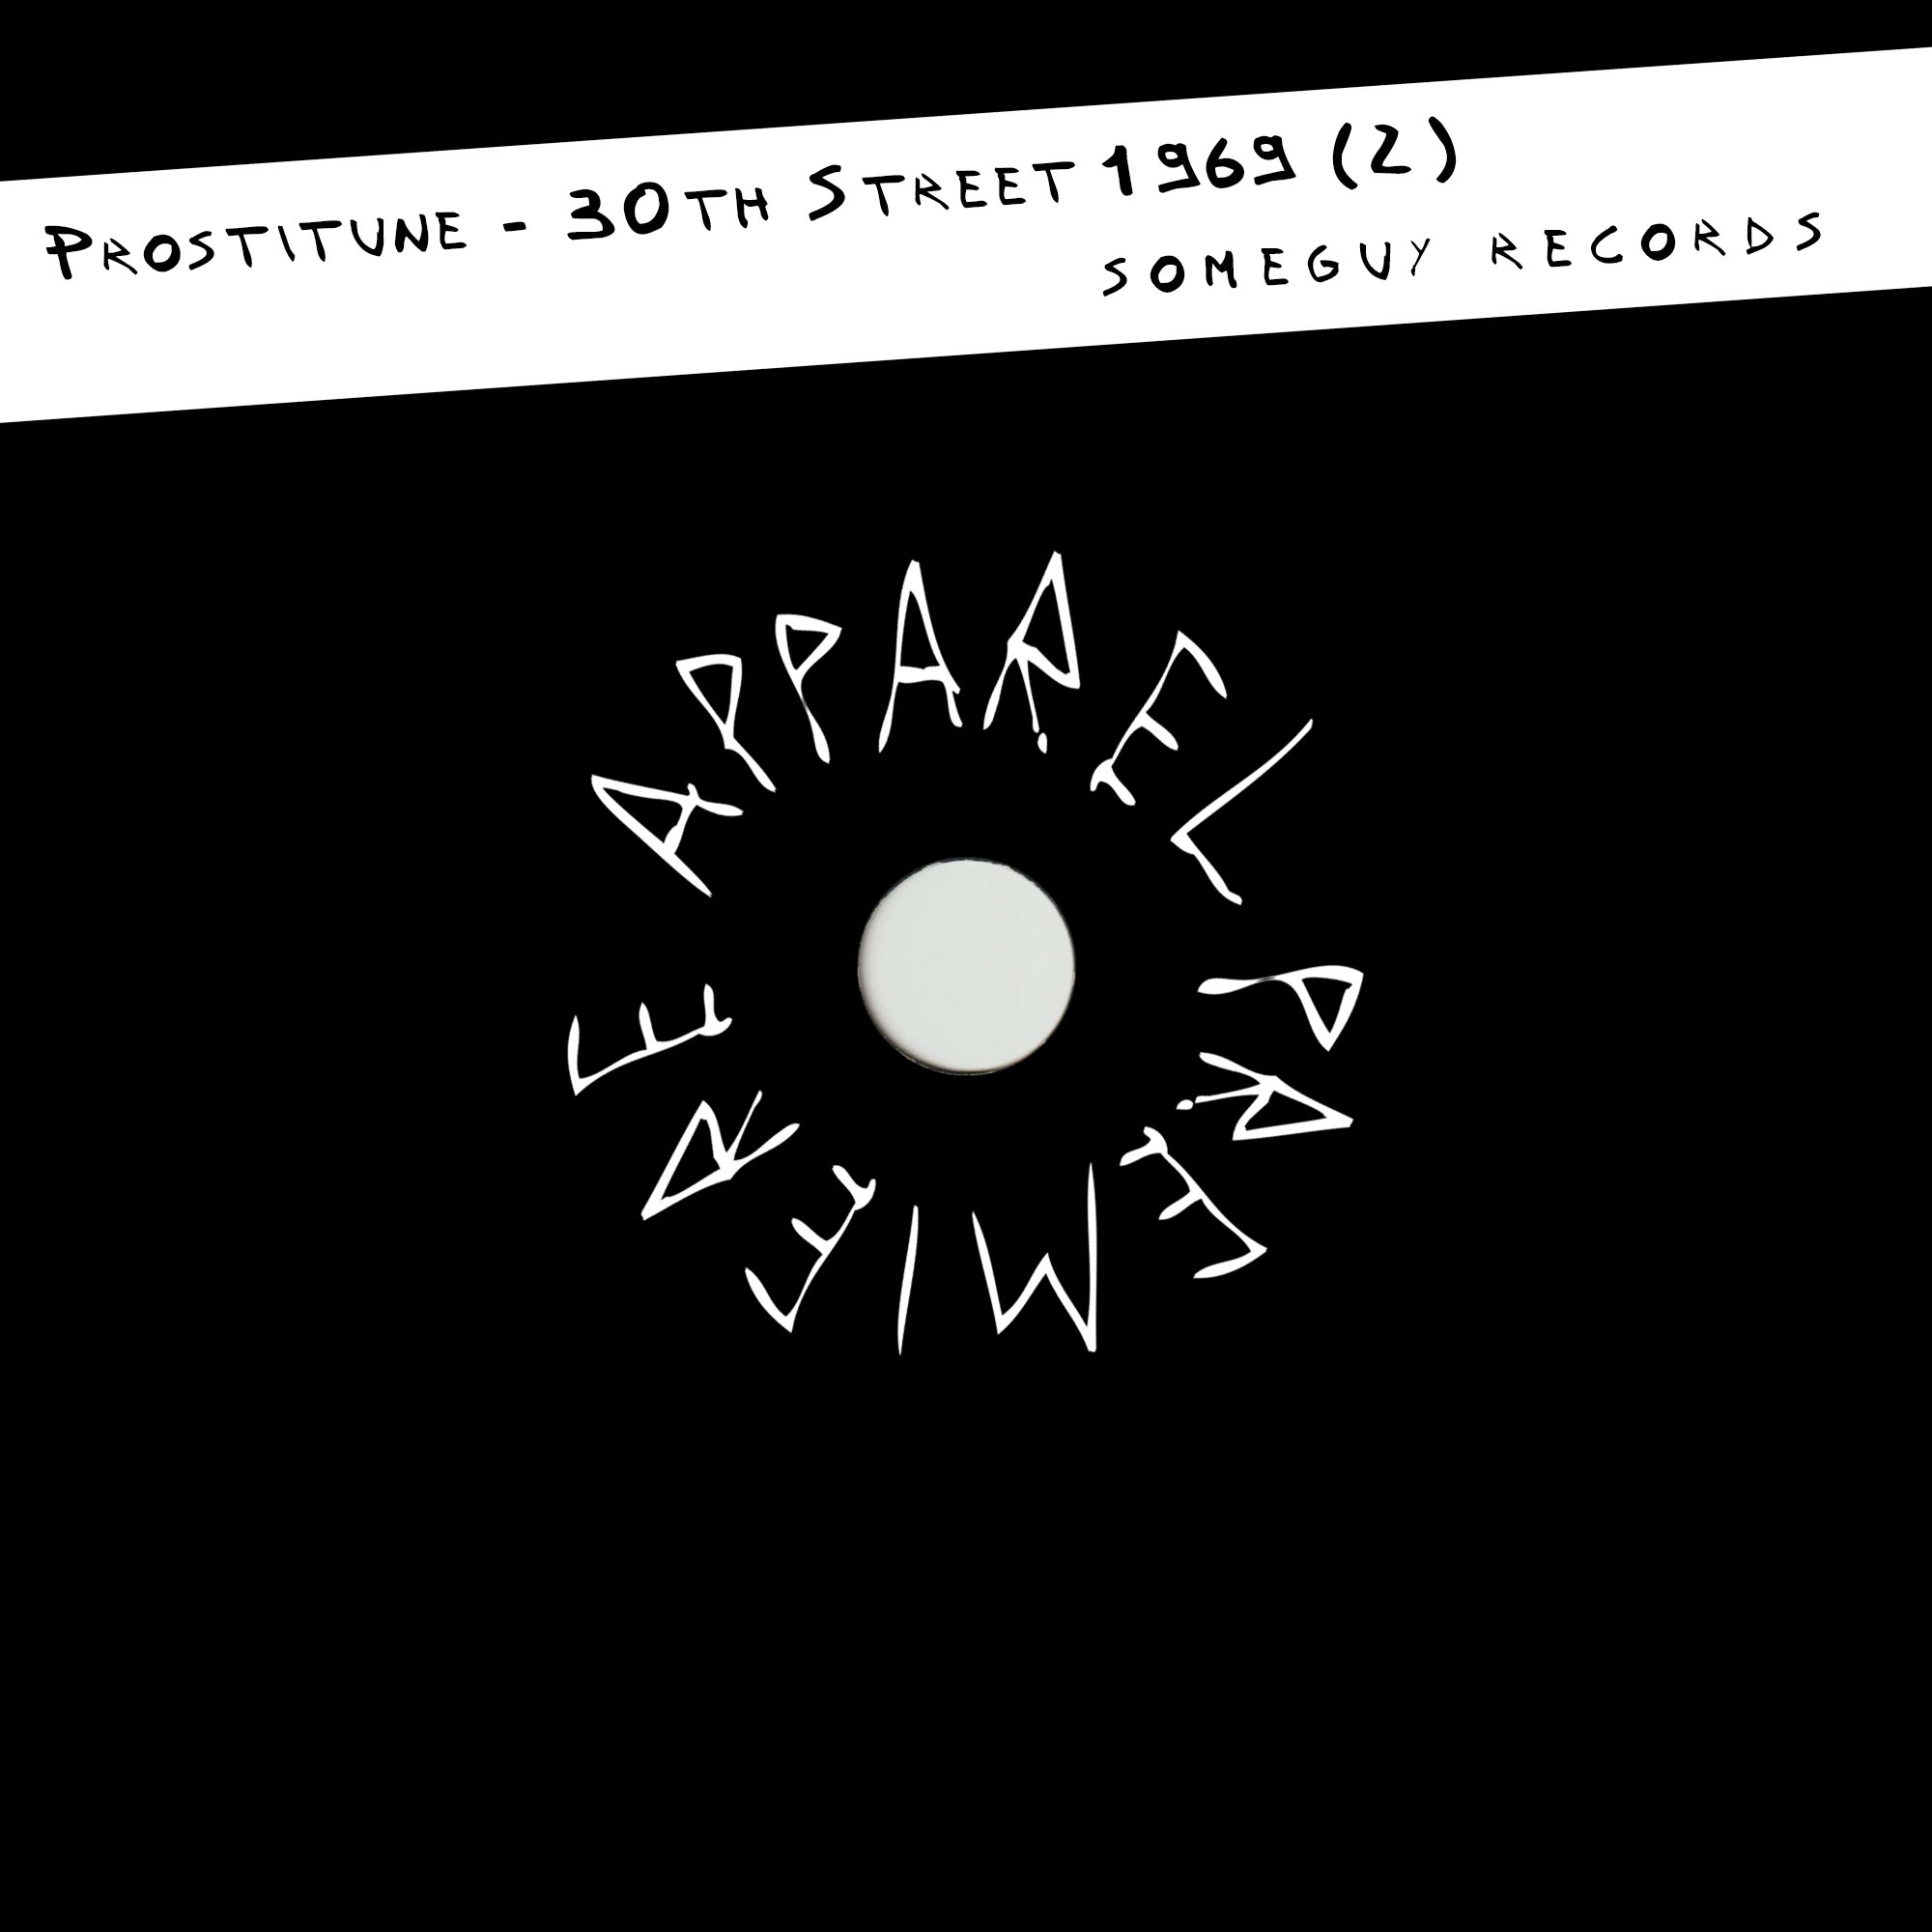 APPAREL PREMIERE Prostitune – 30th Street 1969 (2) [Someguy Records]